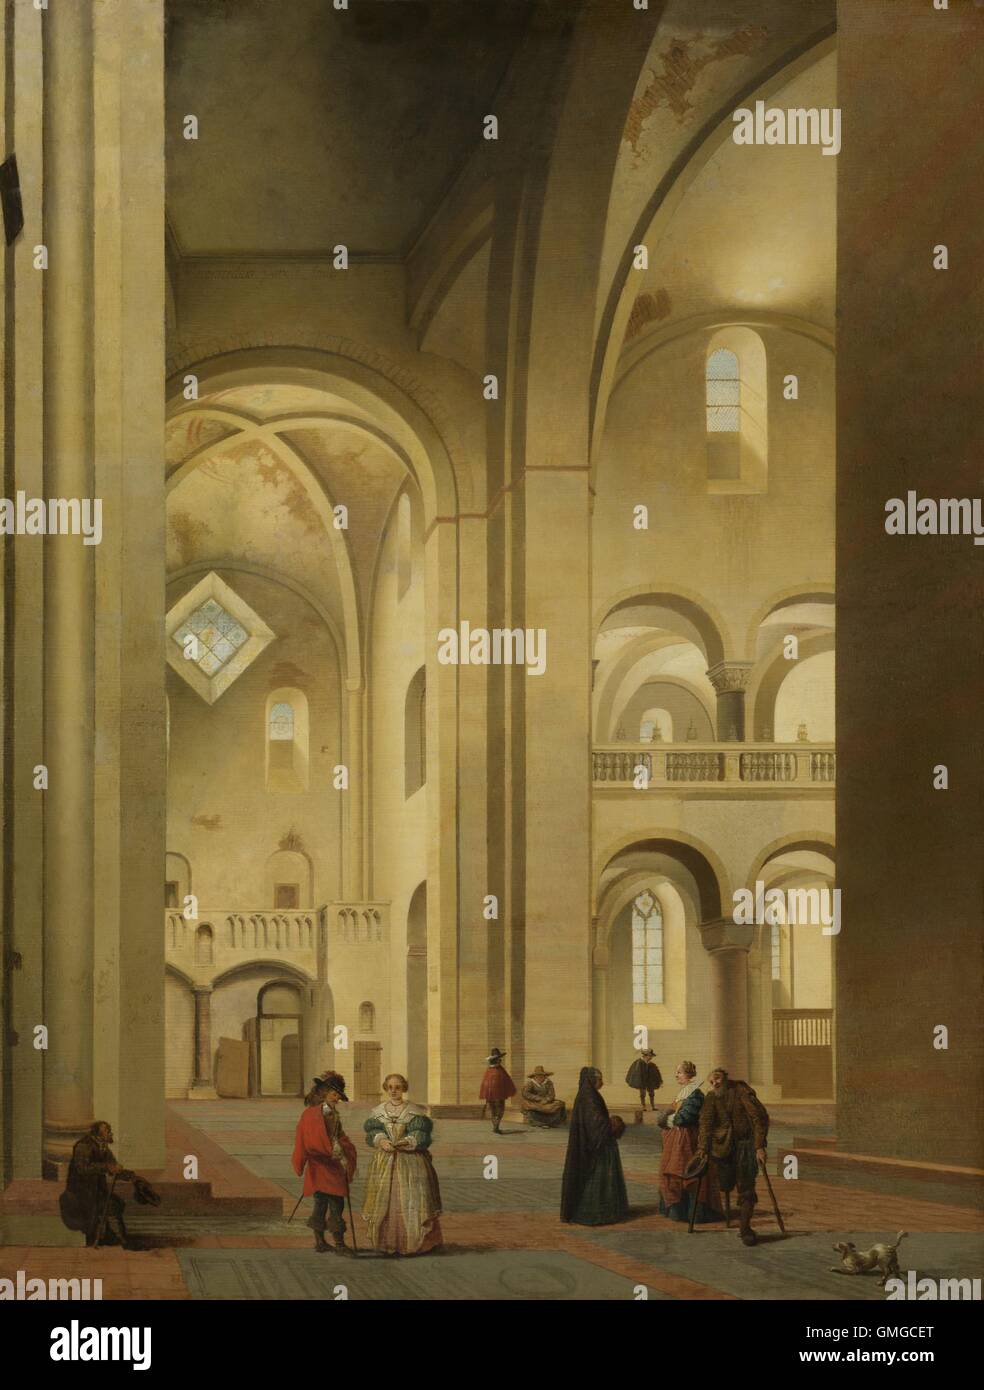 Transept of the Mariakerk, Utrecht, from the Northeast, by Pieter Saenredam, 1637, Dutch oil painting. The Romanesque style Church was built in the eleventh century and was demolished in stages during the first half of the nineteenth century (BSLOC 2016 3 267) Stock Photo